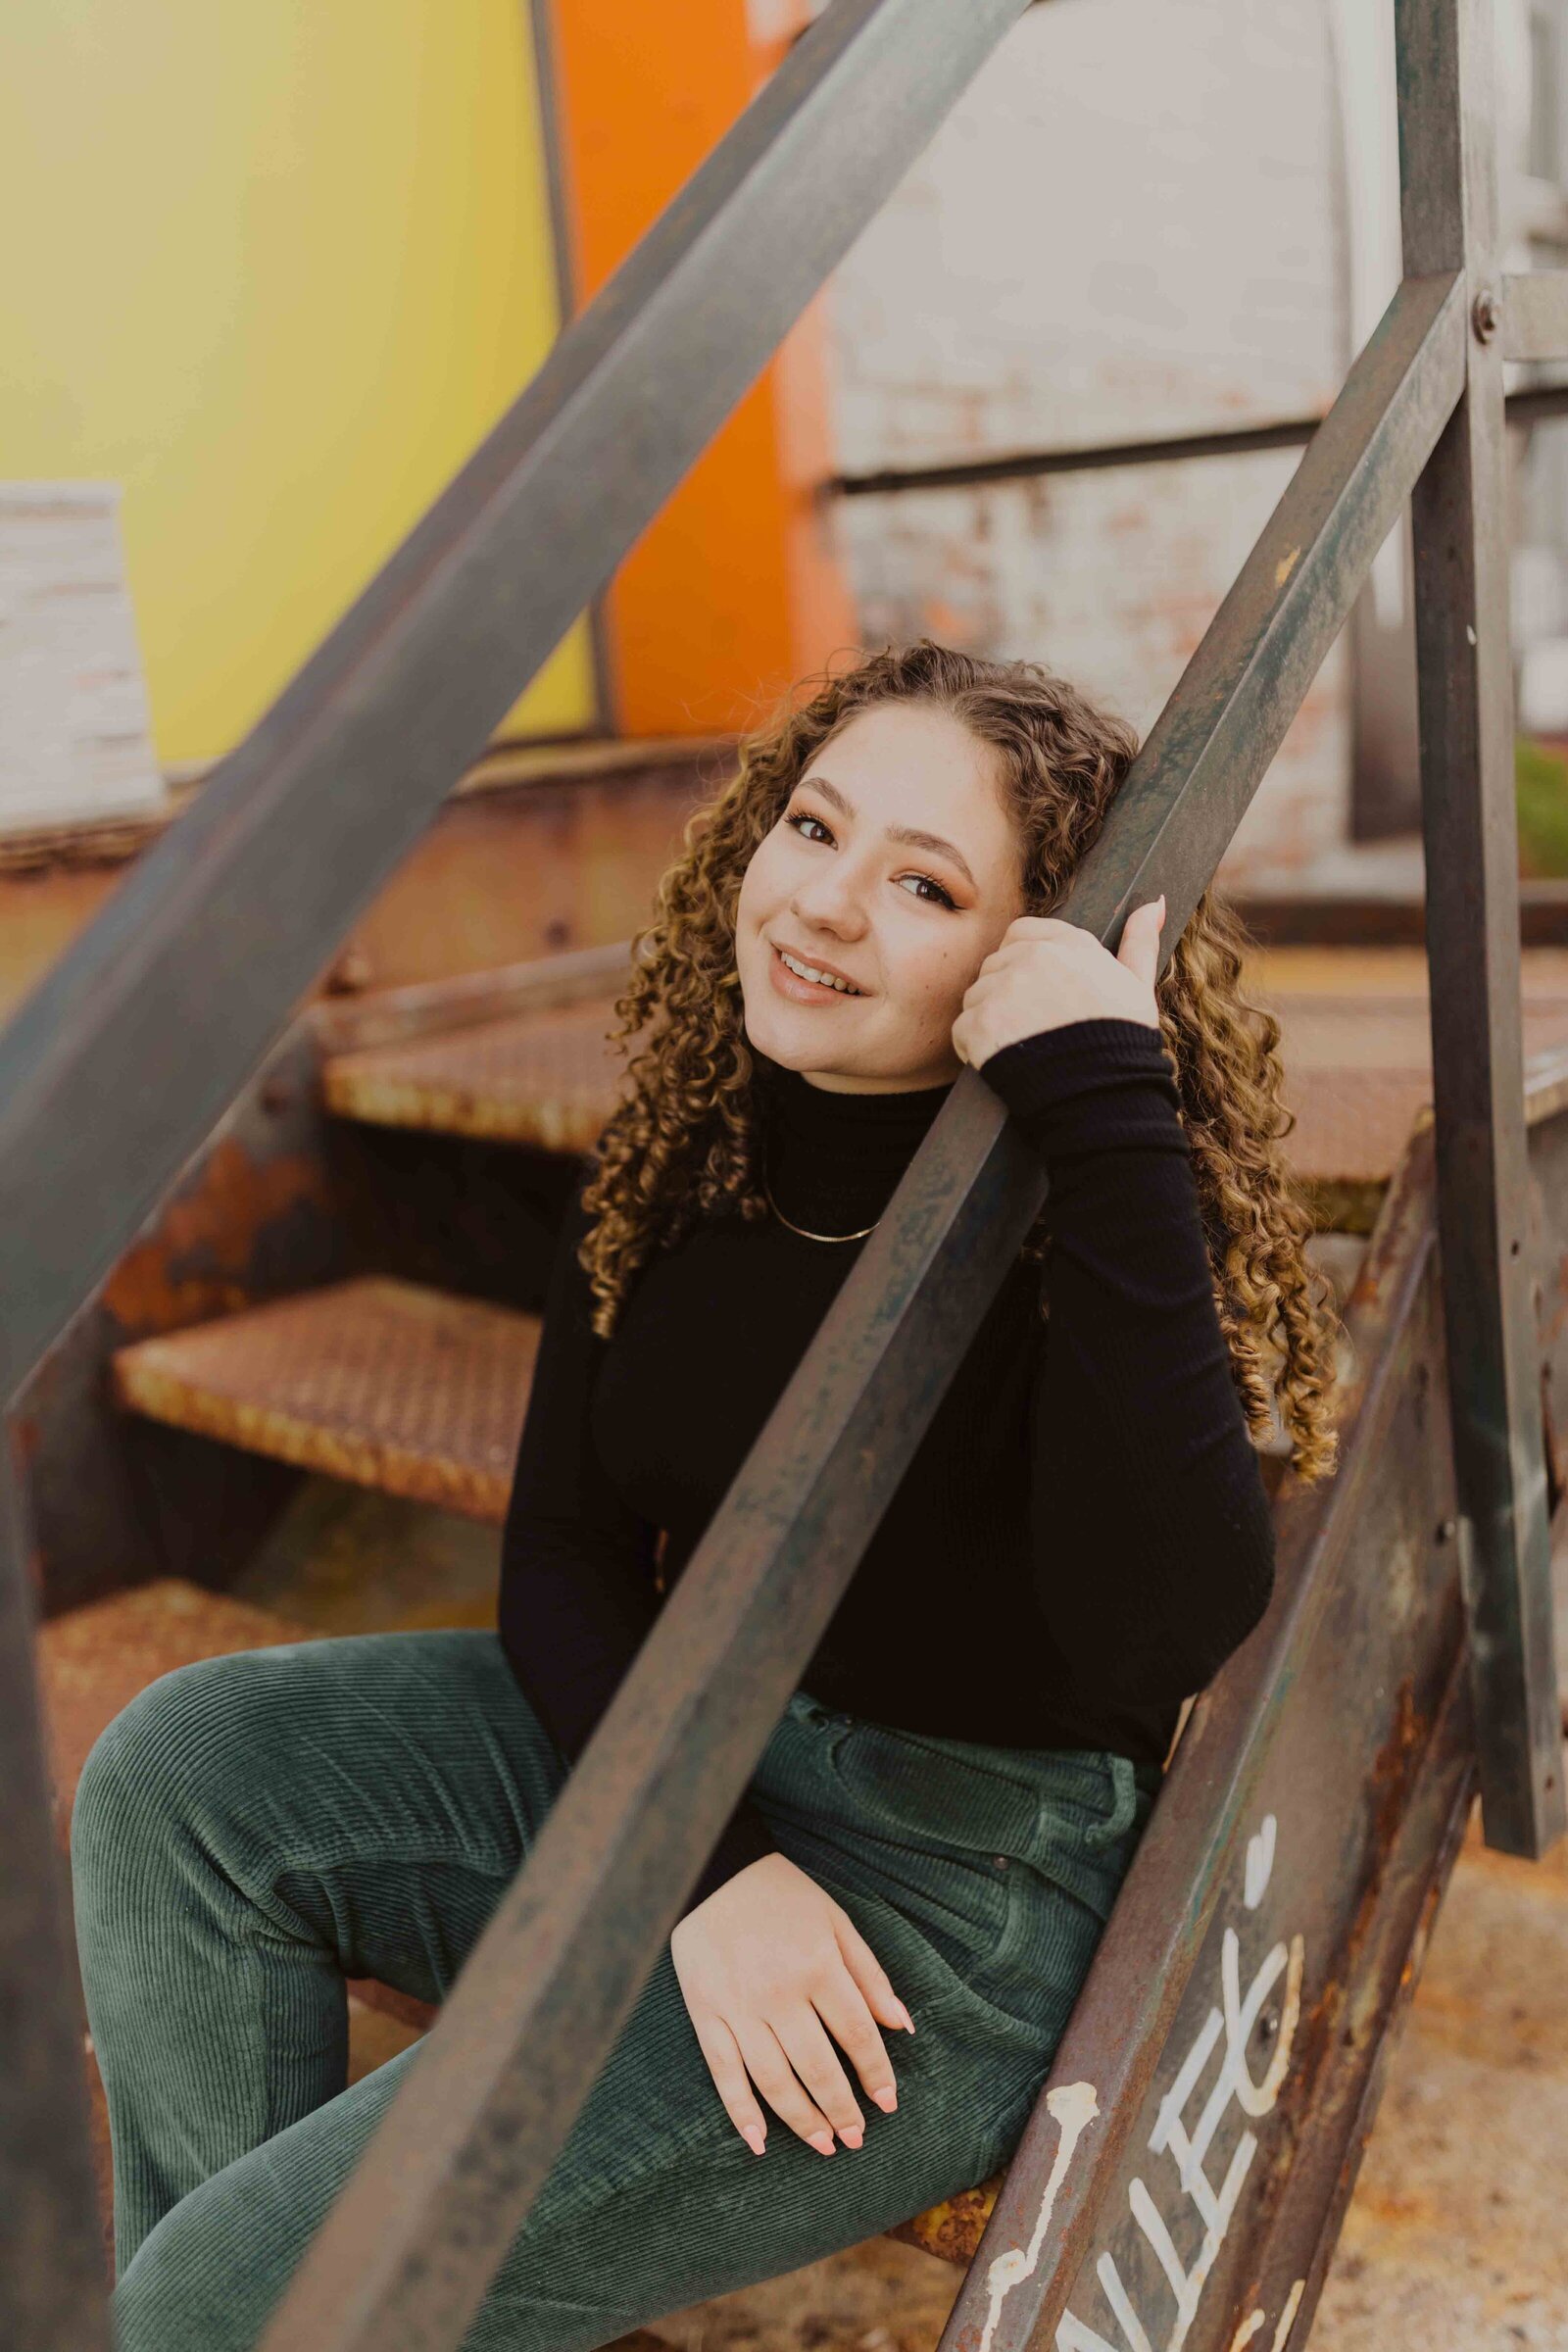 Senior girl sitting on metal stairs, holding onto railing and smiling.